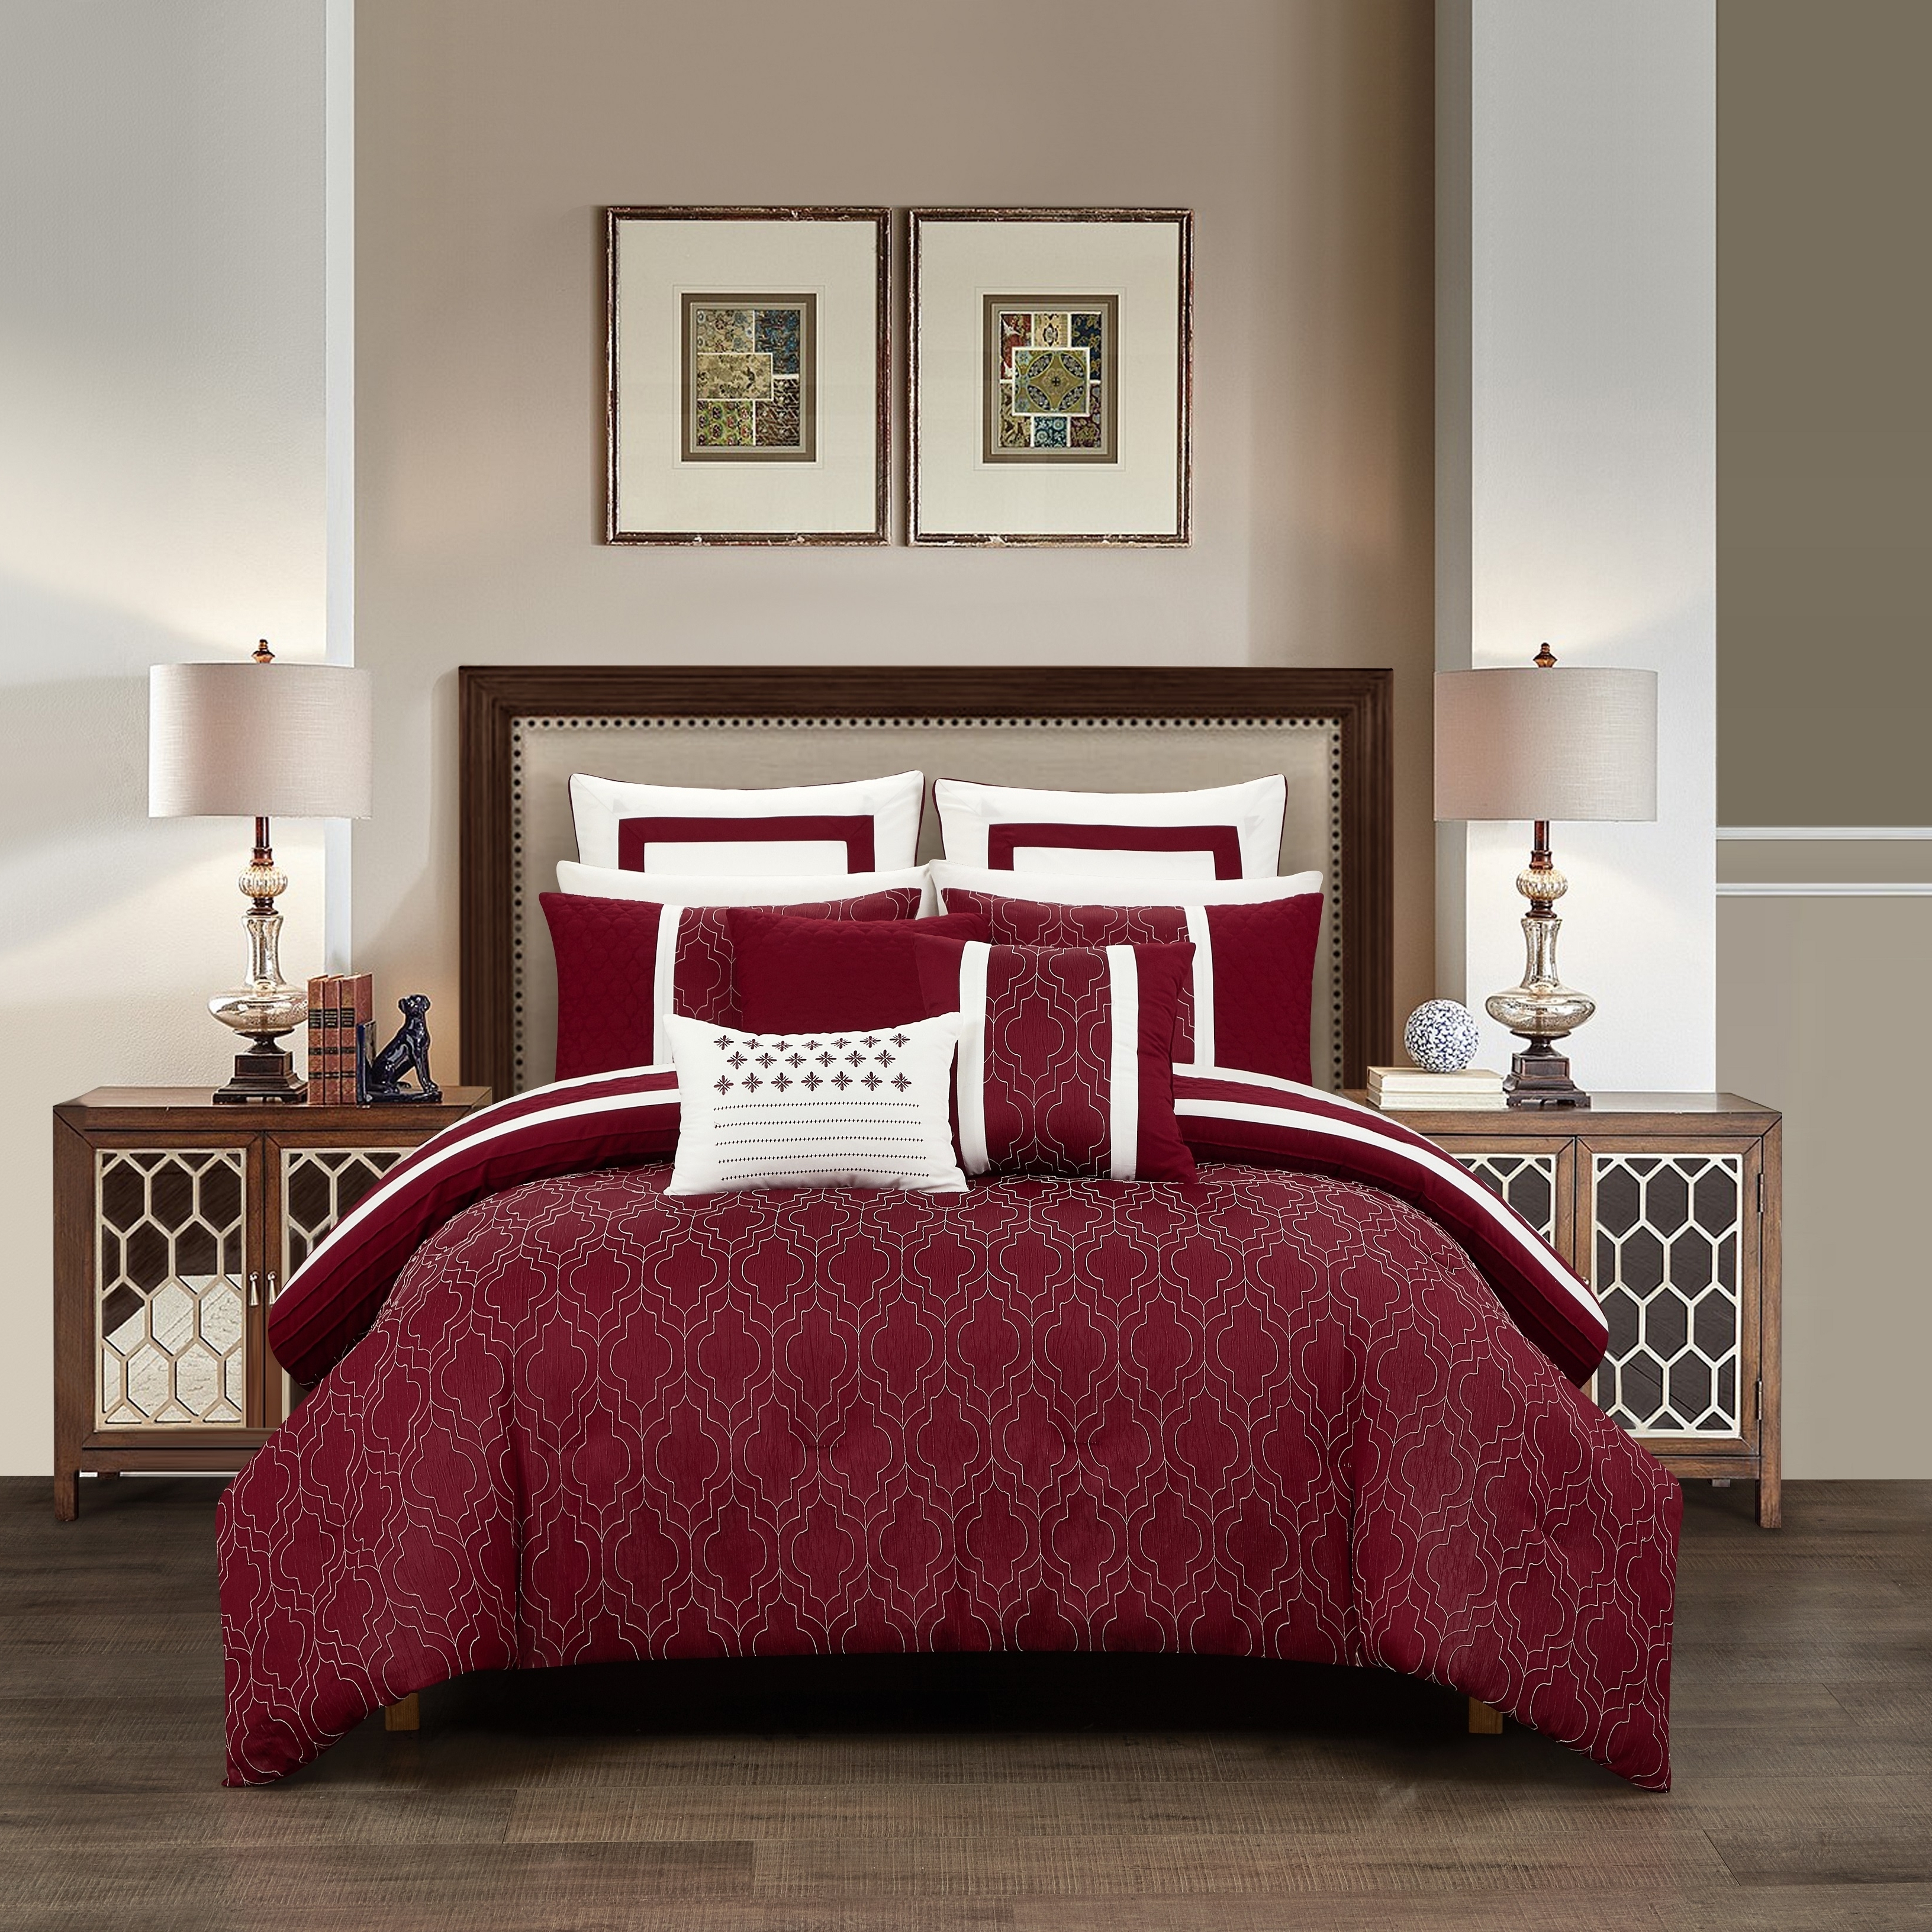 Arlow 8 Piece Comforter Set Jacquard Geometric Quilted Pattern Design Bedding - Berry, King